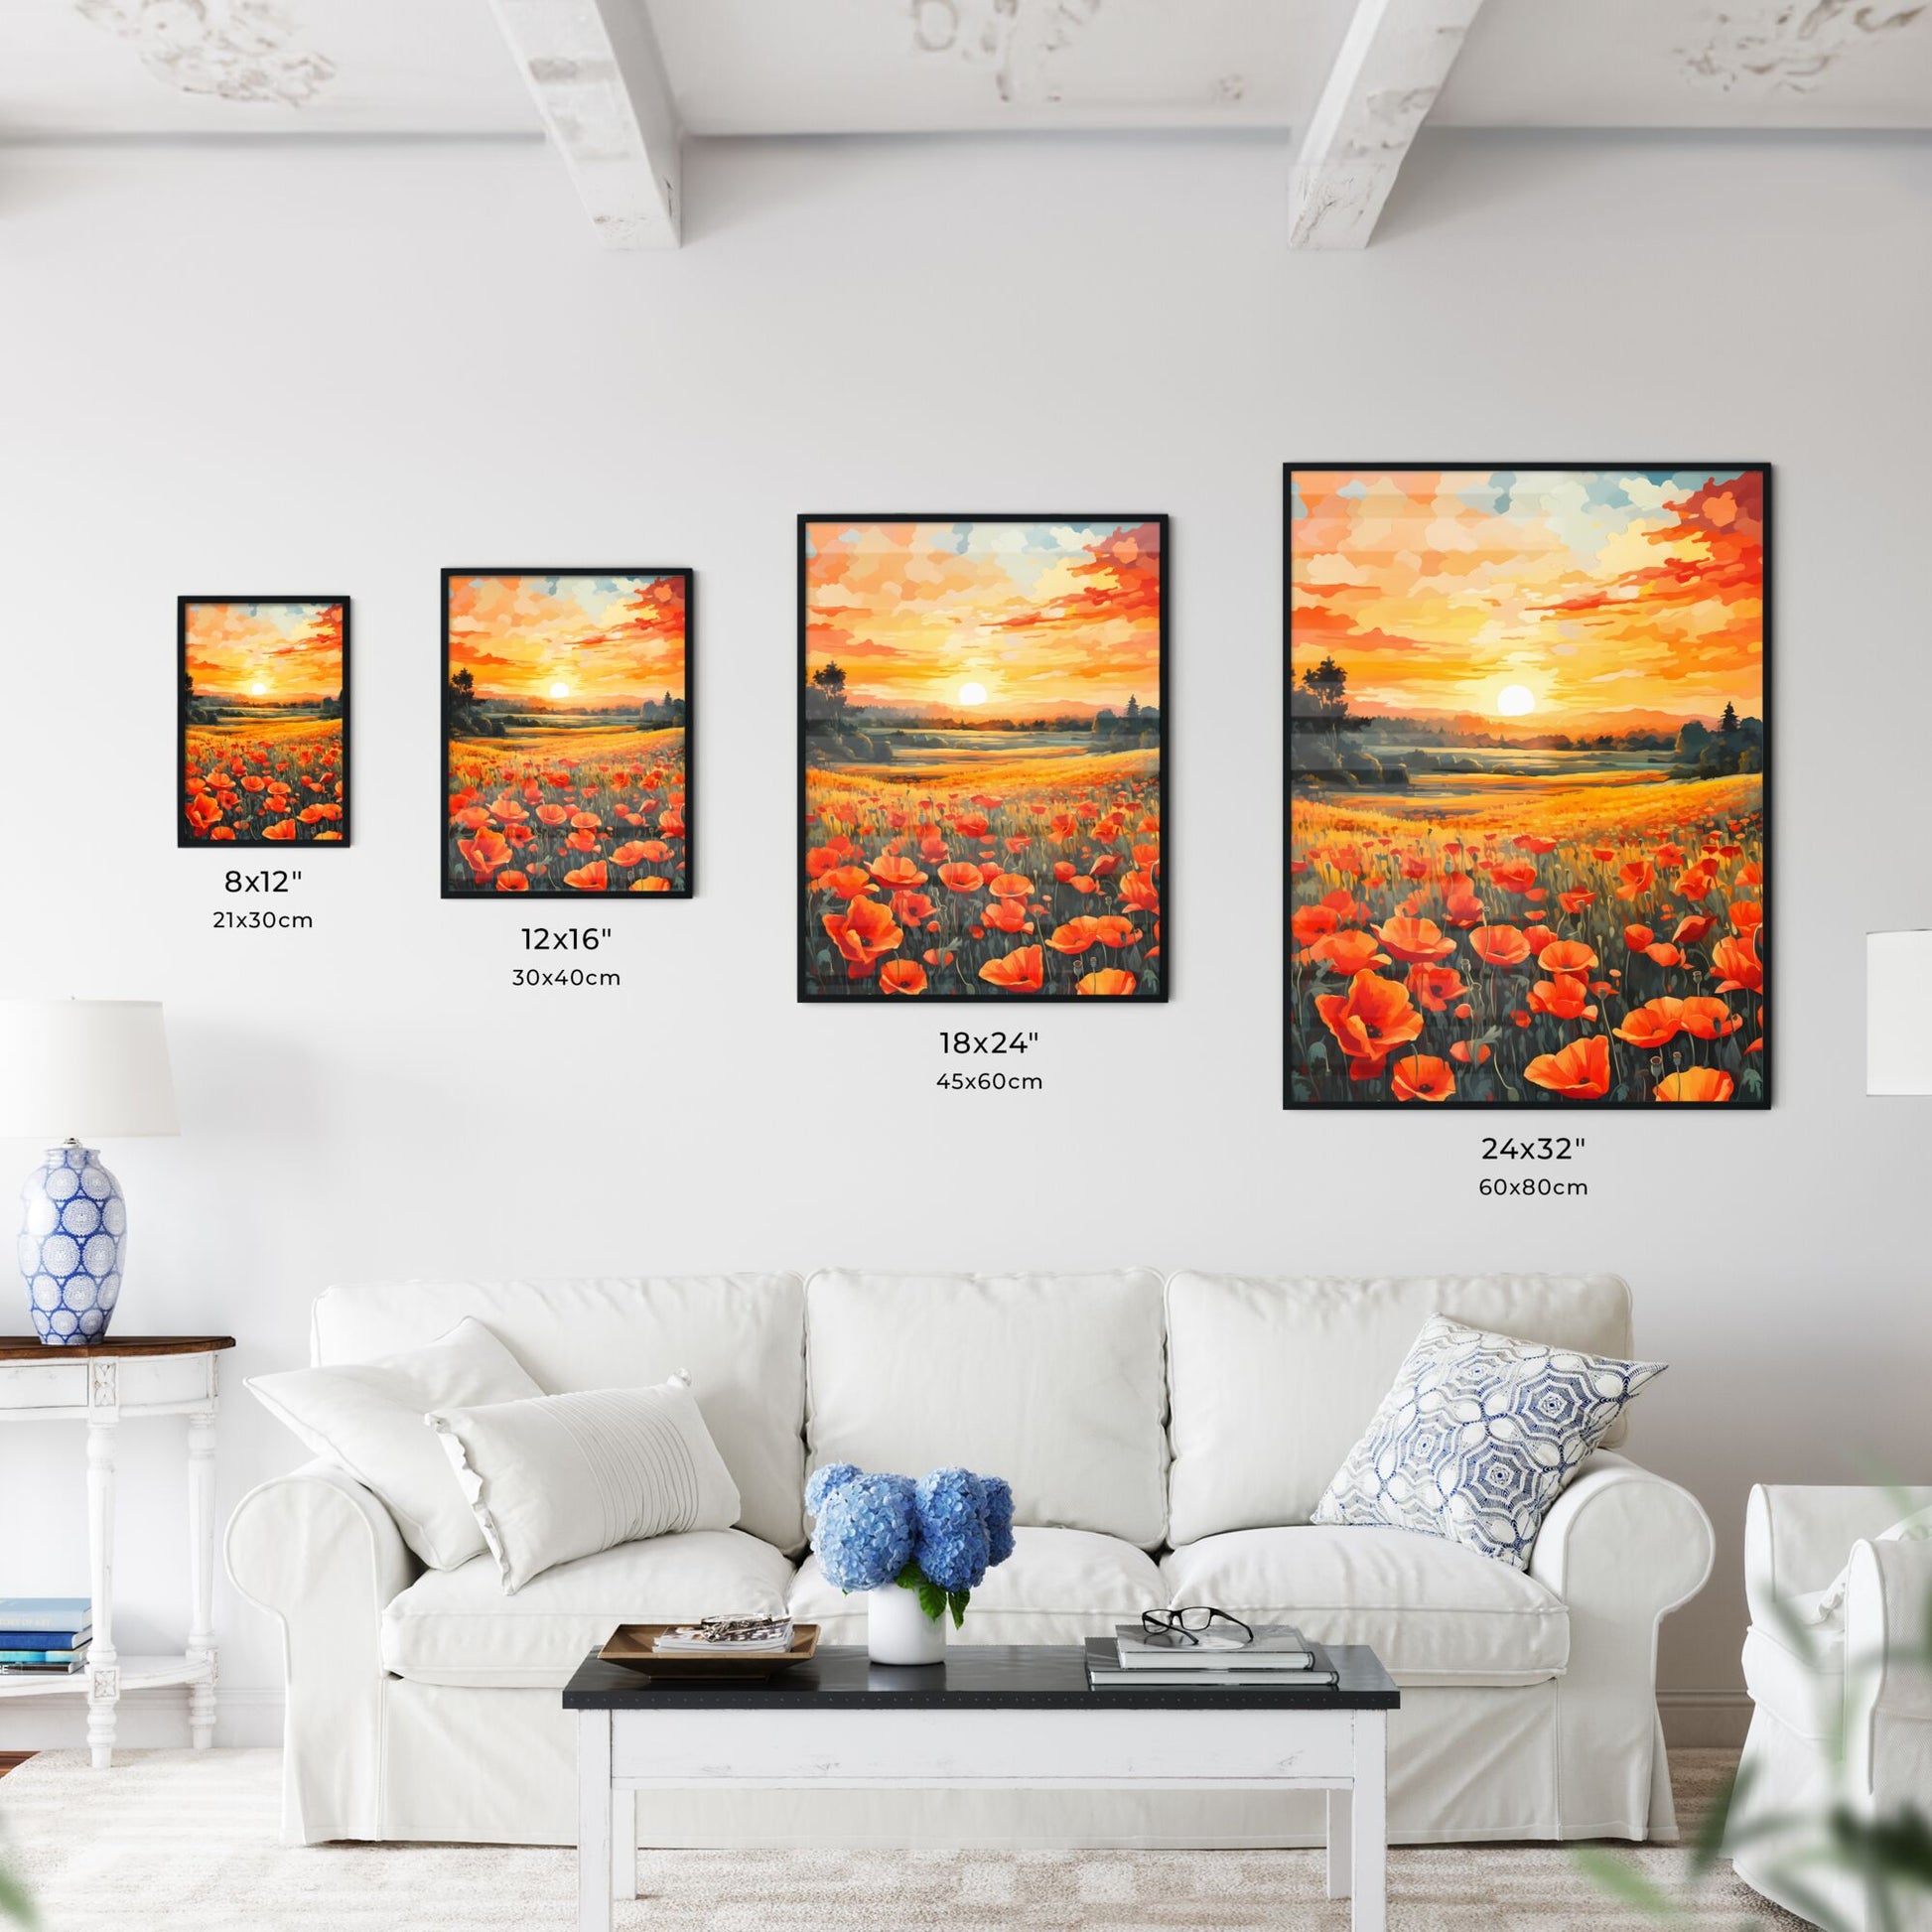 Field Of Flowers With A Sunset In The Background Art Print Default Title